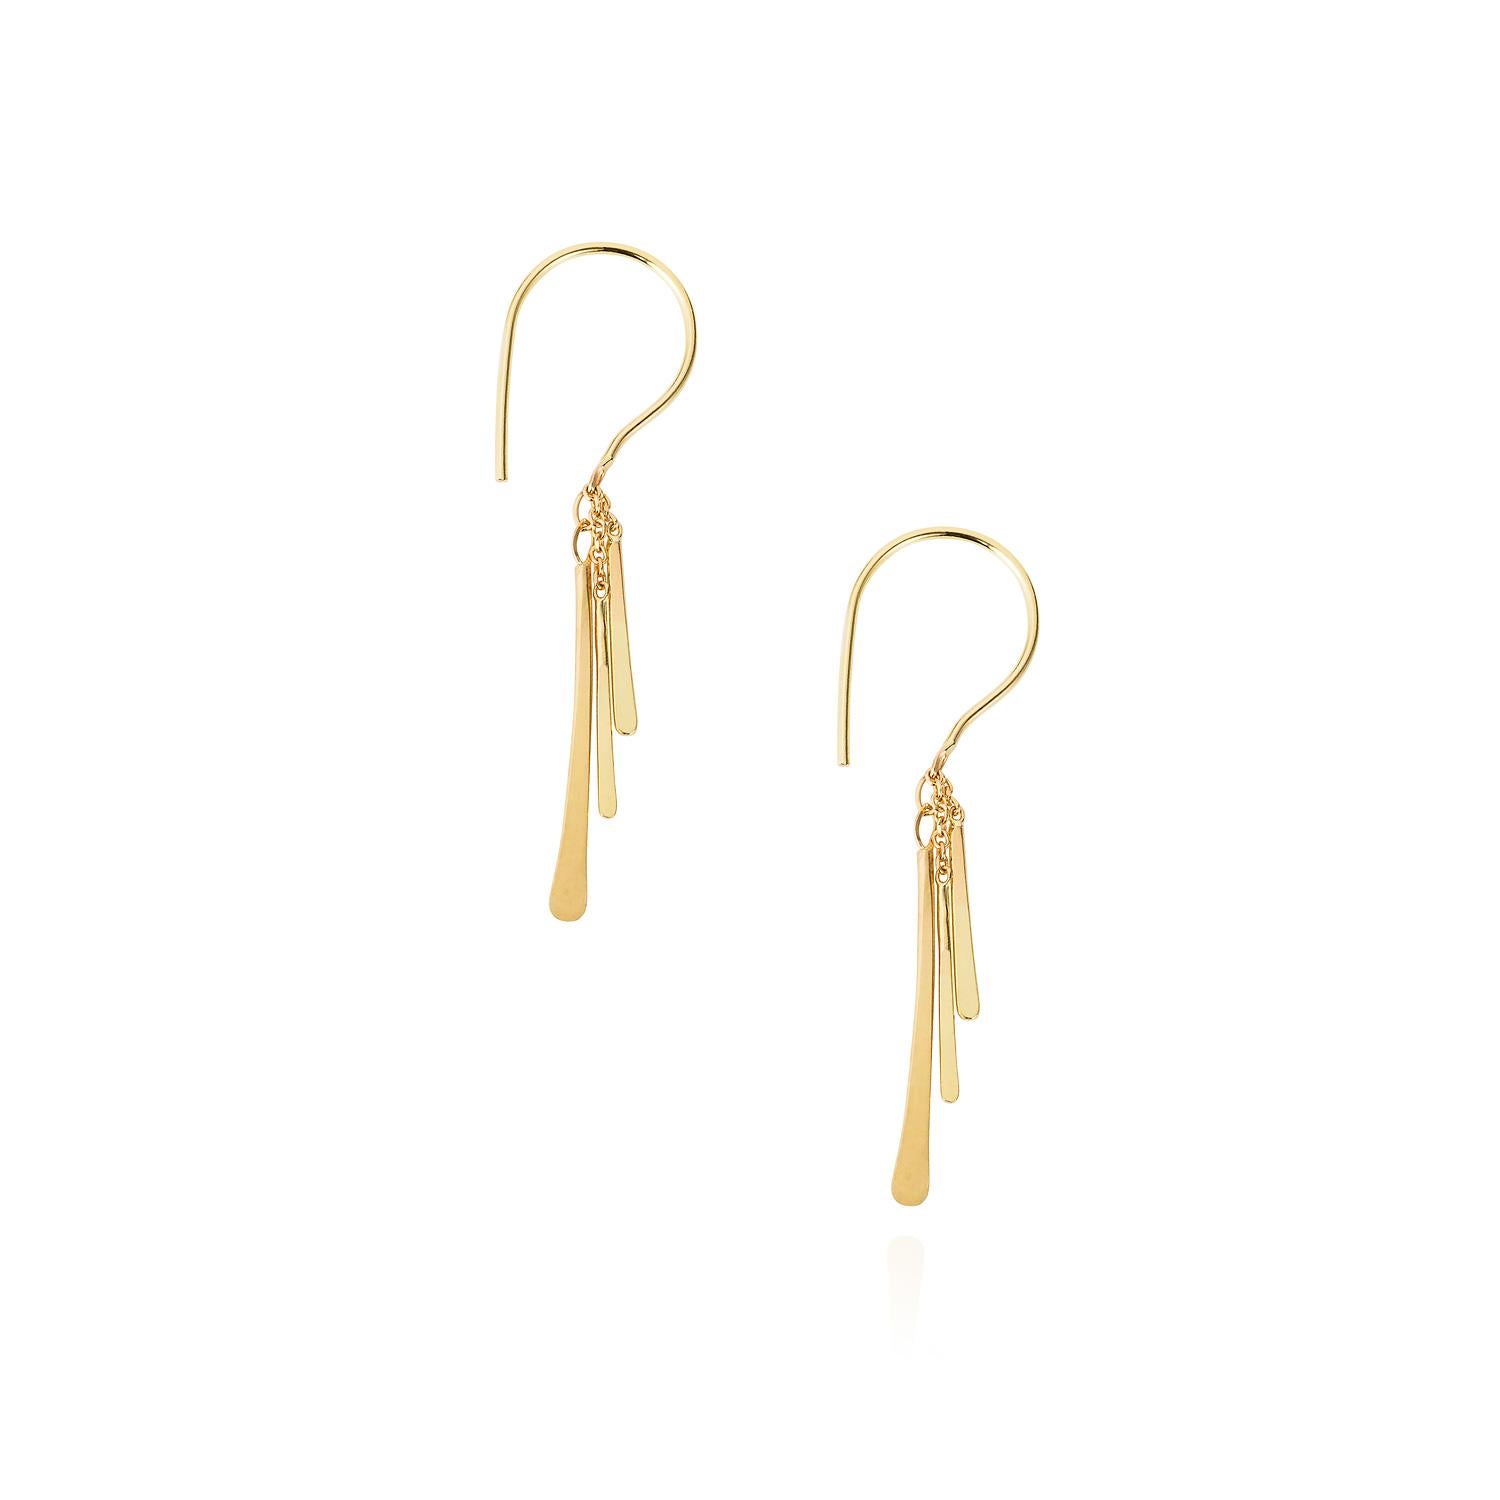 Sweet Pea Sycamore 18k Yellow Gold Hook Drop Earrings with Three Hanging Bars For Sale